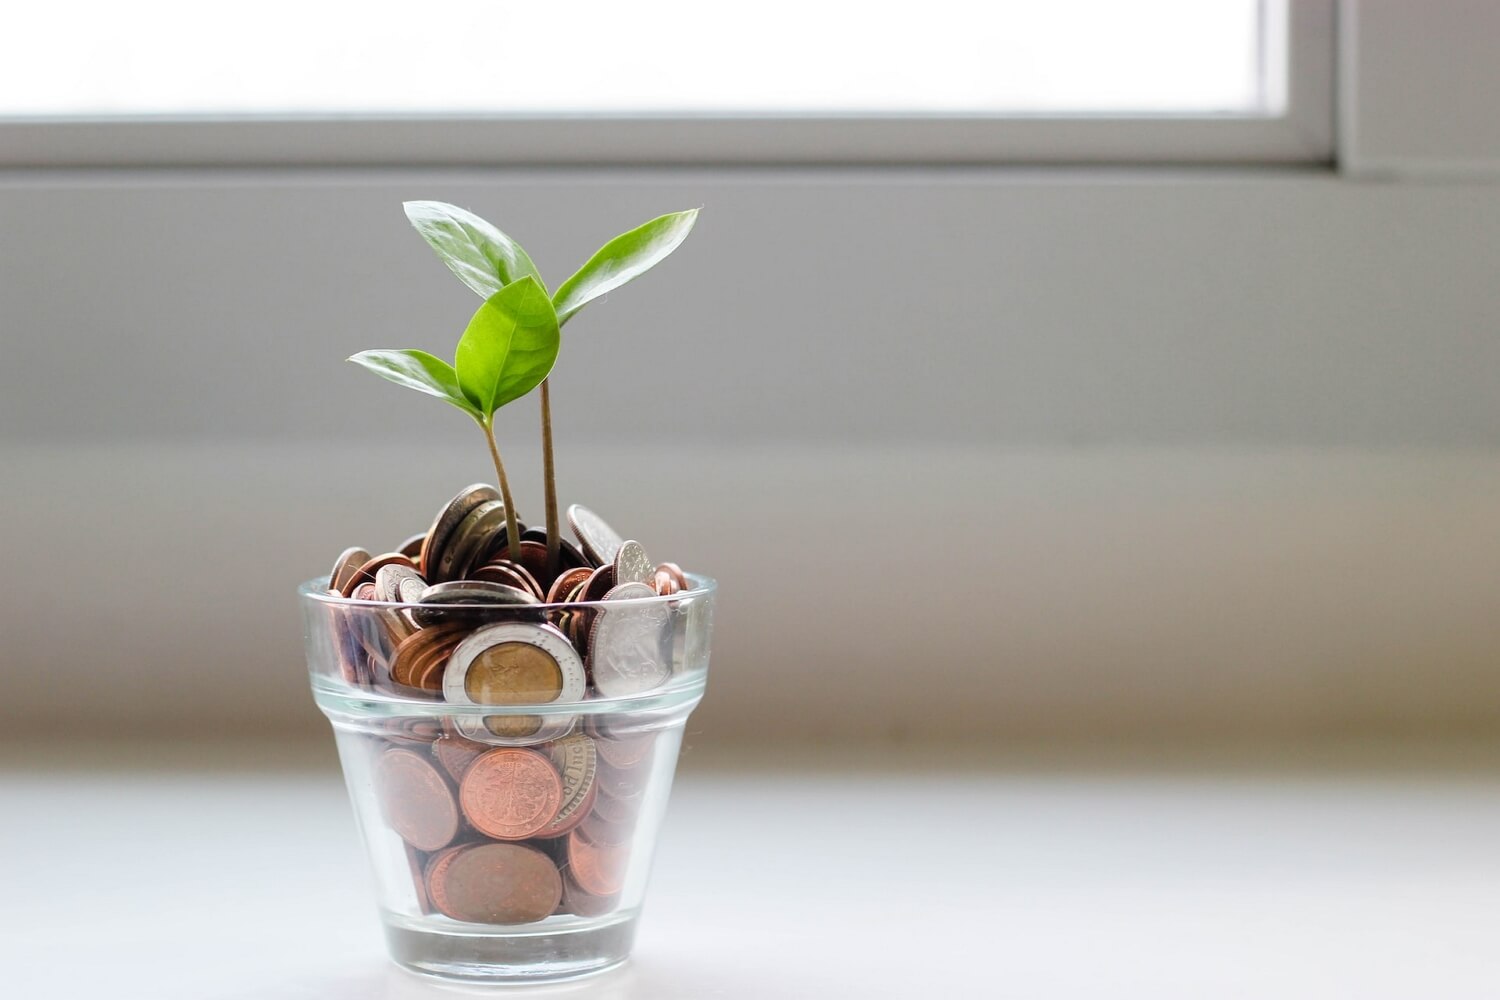 Glass with money and a little plant